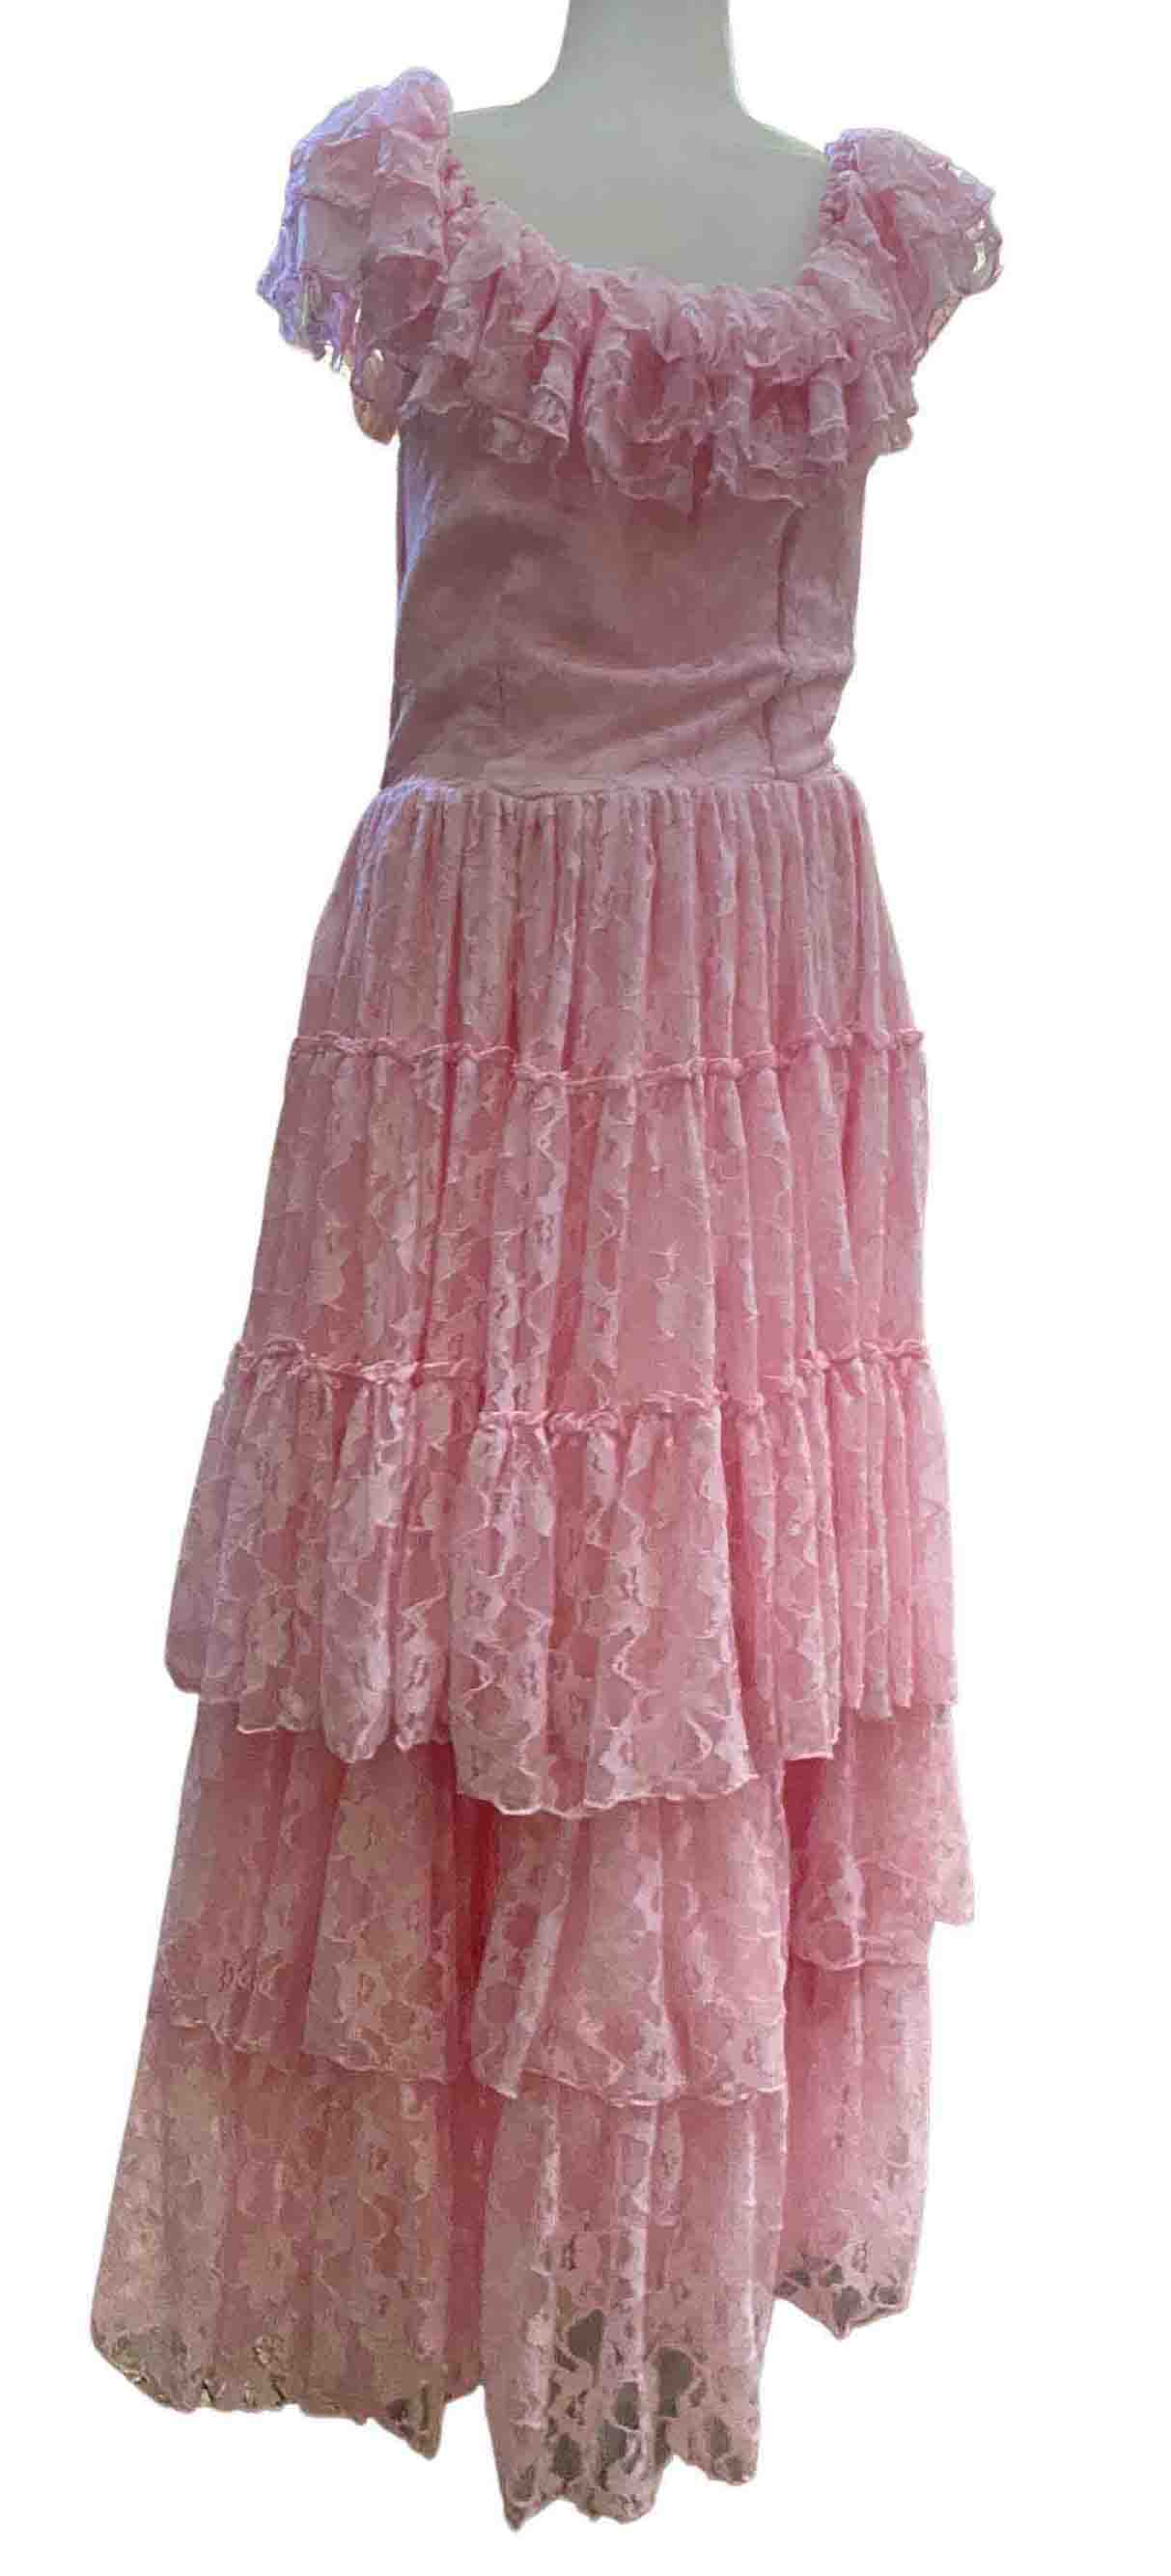 The pink Lace Wednesday Off Shoulder Dress, front view.